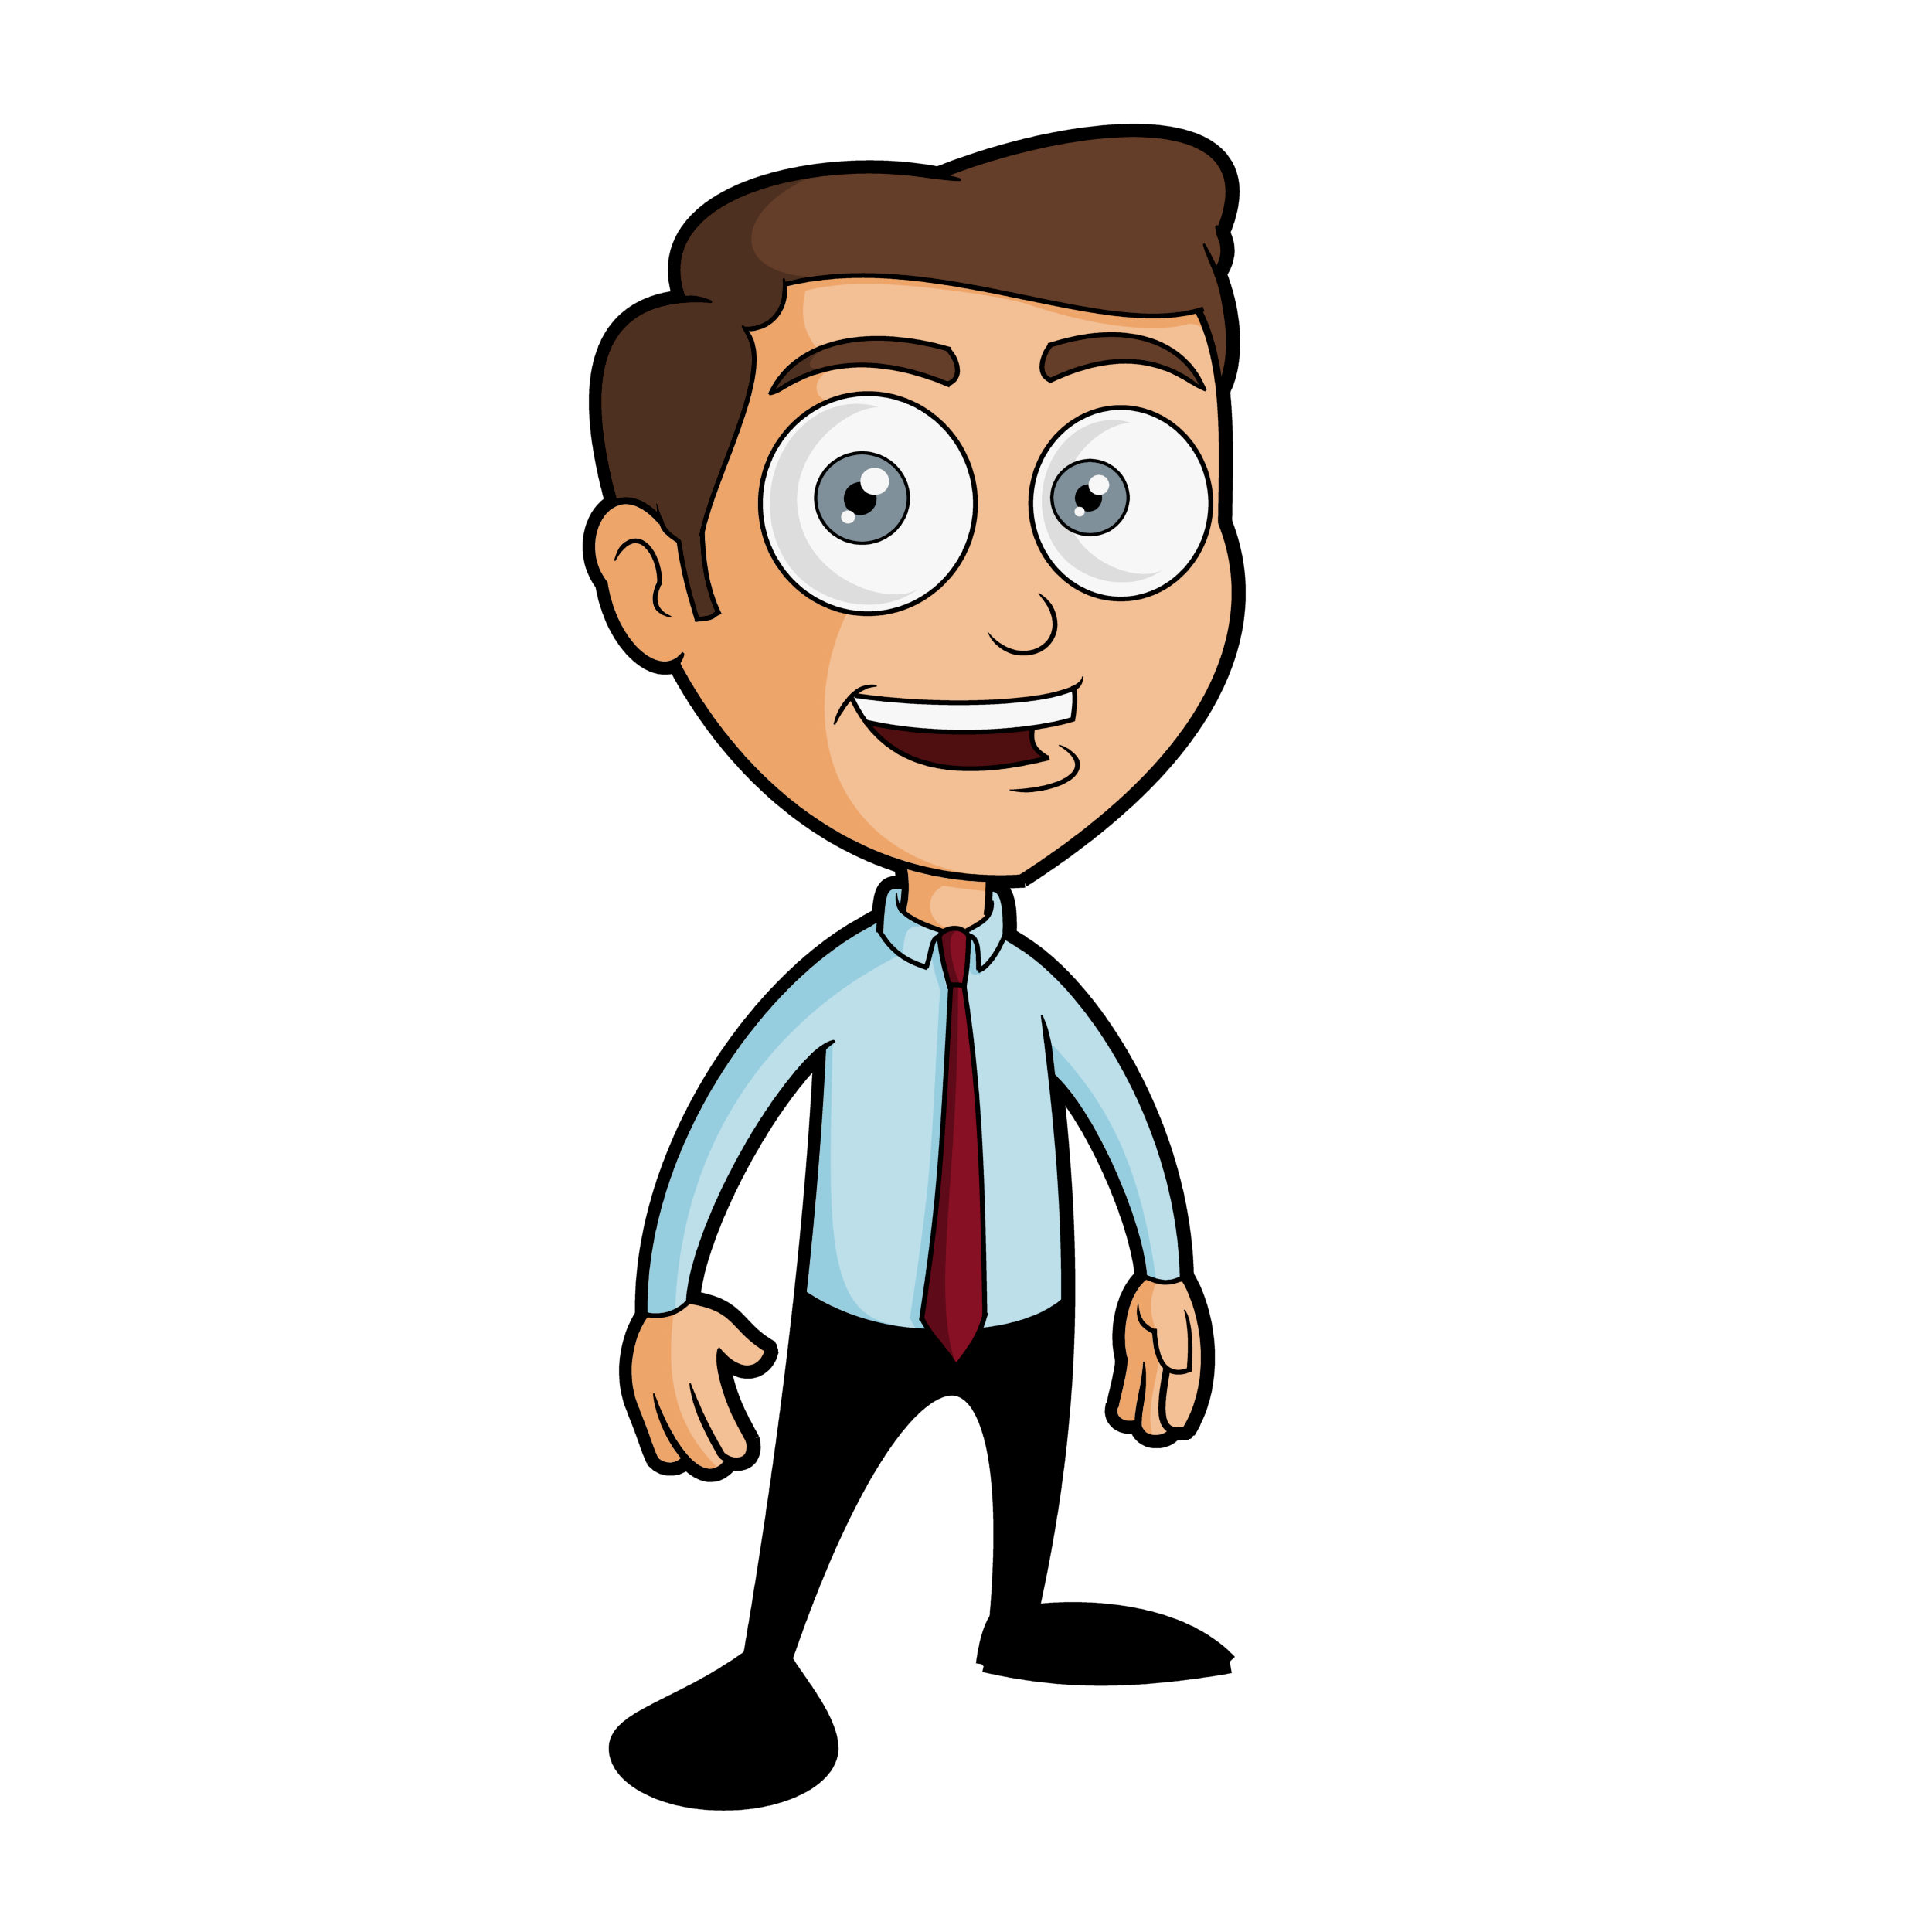 Young clipart guy. Man cartoon picture free